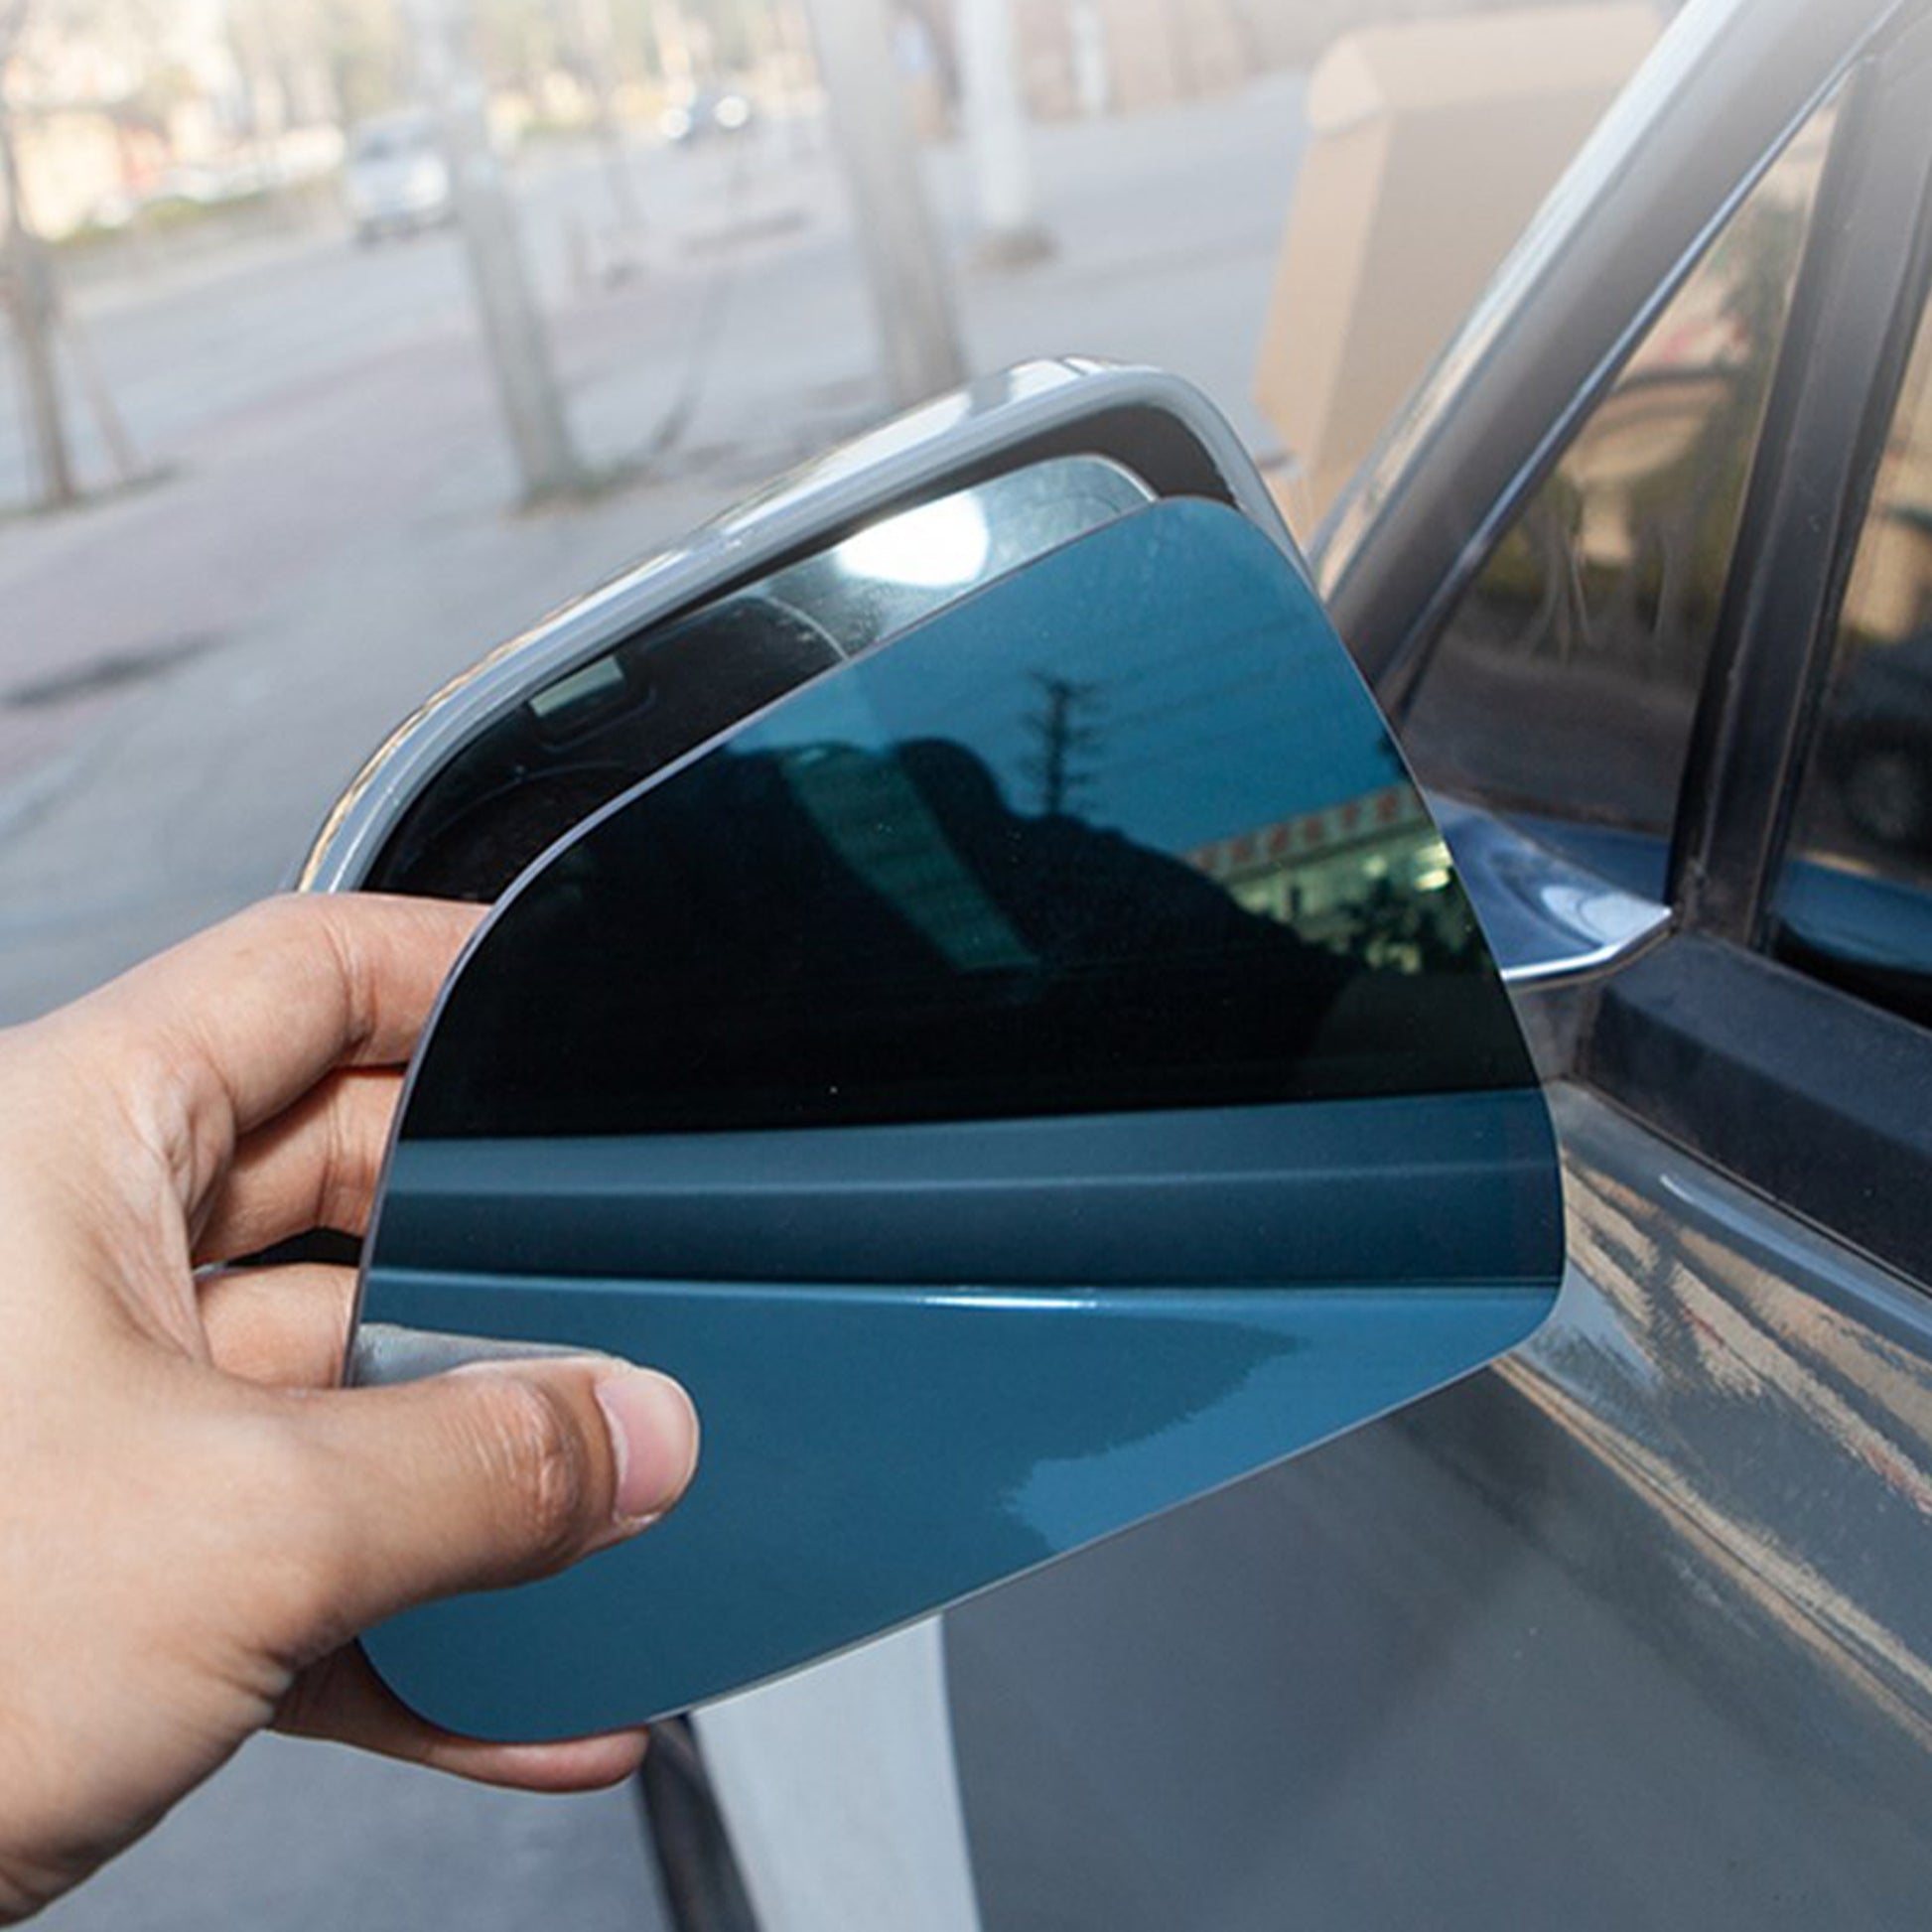 Arcoche Tesla Model 3 2018 2019 2020 2021 2022 2023 Side Mirrors surface adopts 2.5D high-definition blue lens with anti-glare effect The raw material is float glass optimized the curvature of the lens to make it more ergonomic and avoid dizziness when looking at the rear mirror.